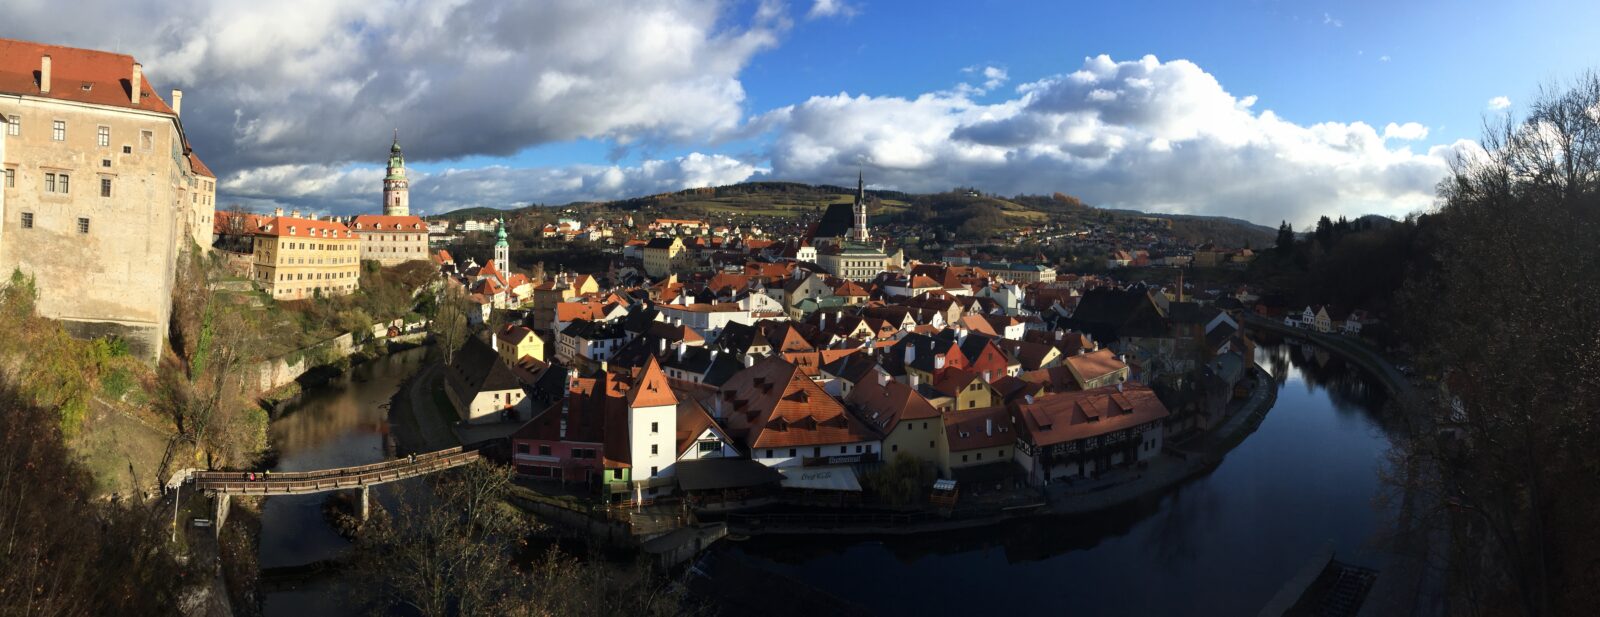 Things To Do In Cesky Krumlov With Kids | Parenthood4ever